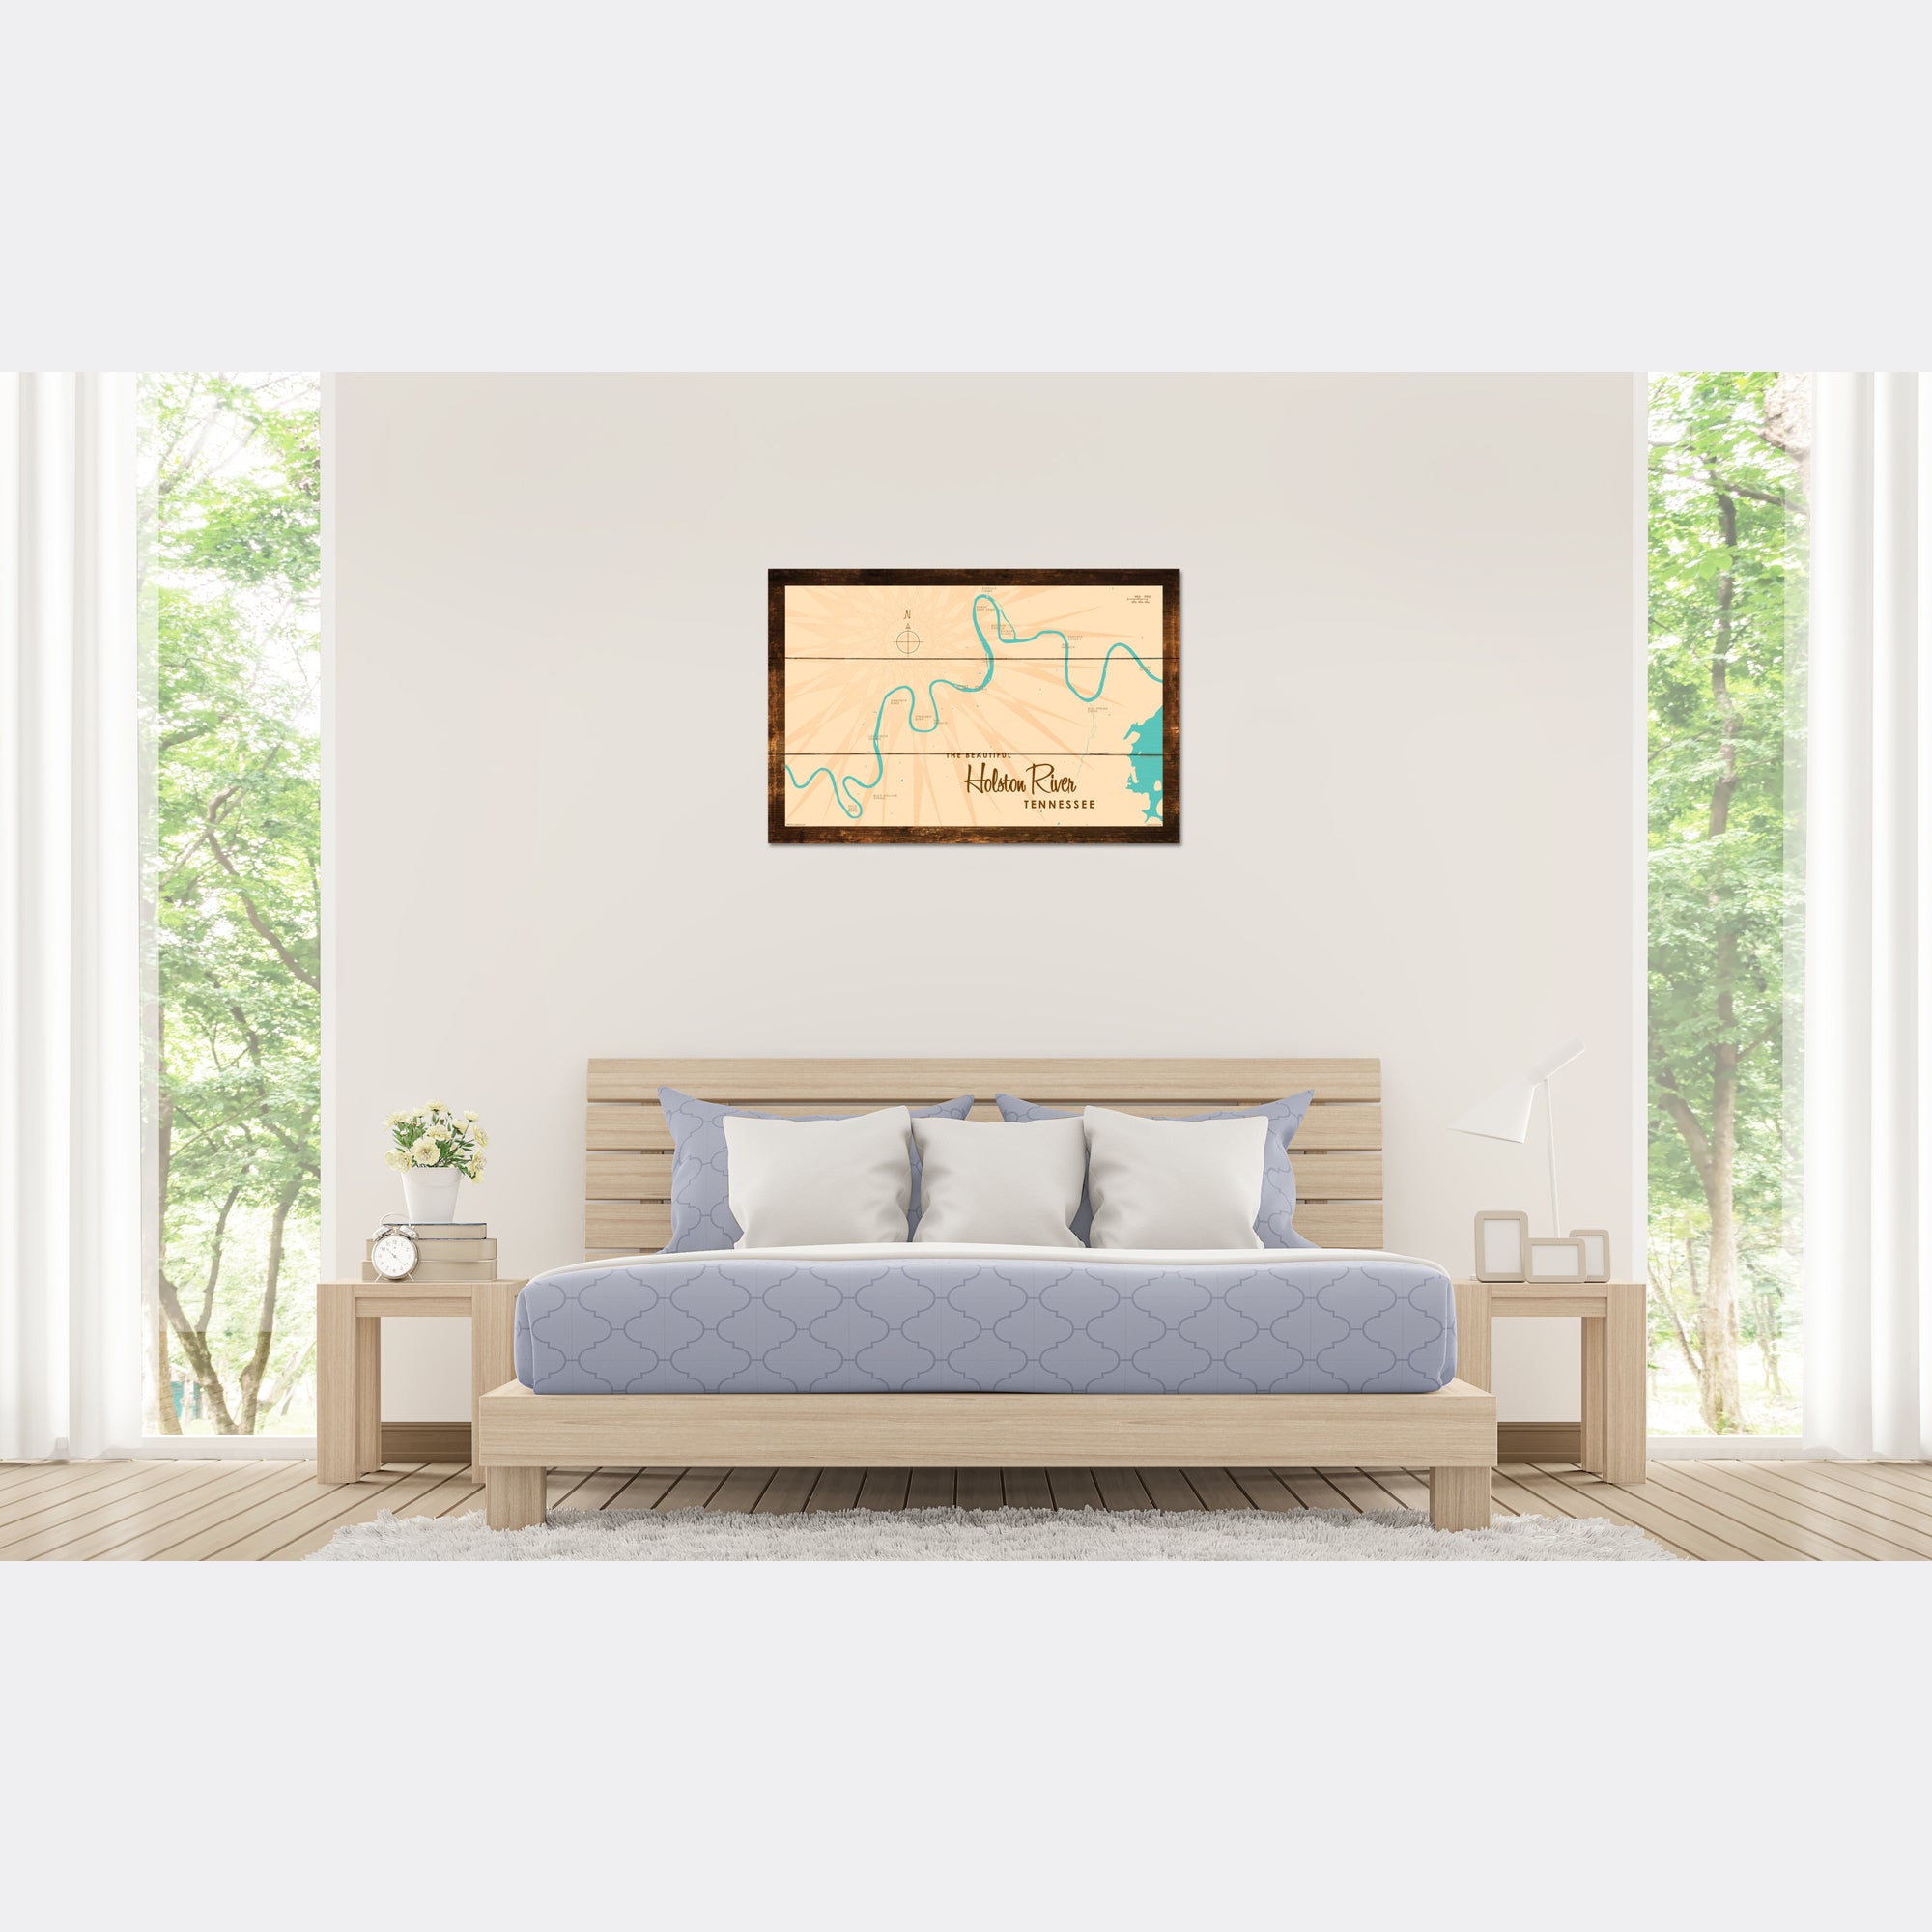 Holston River Tennessee, Rustic Wood Sign Map Art